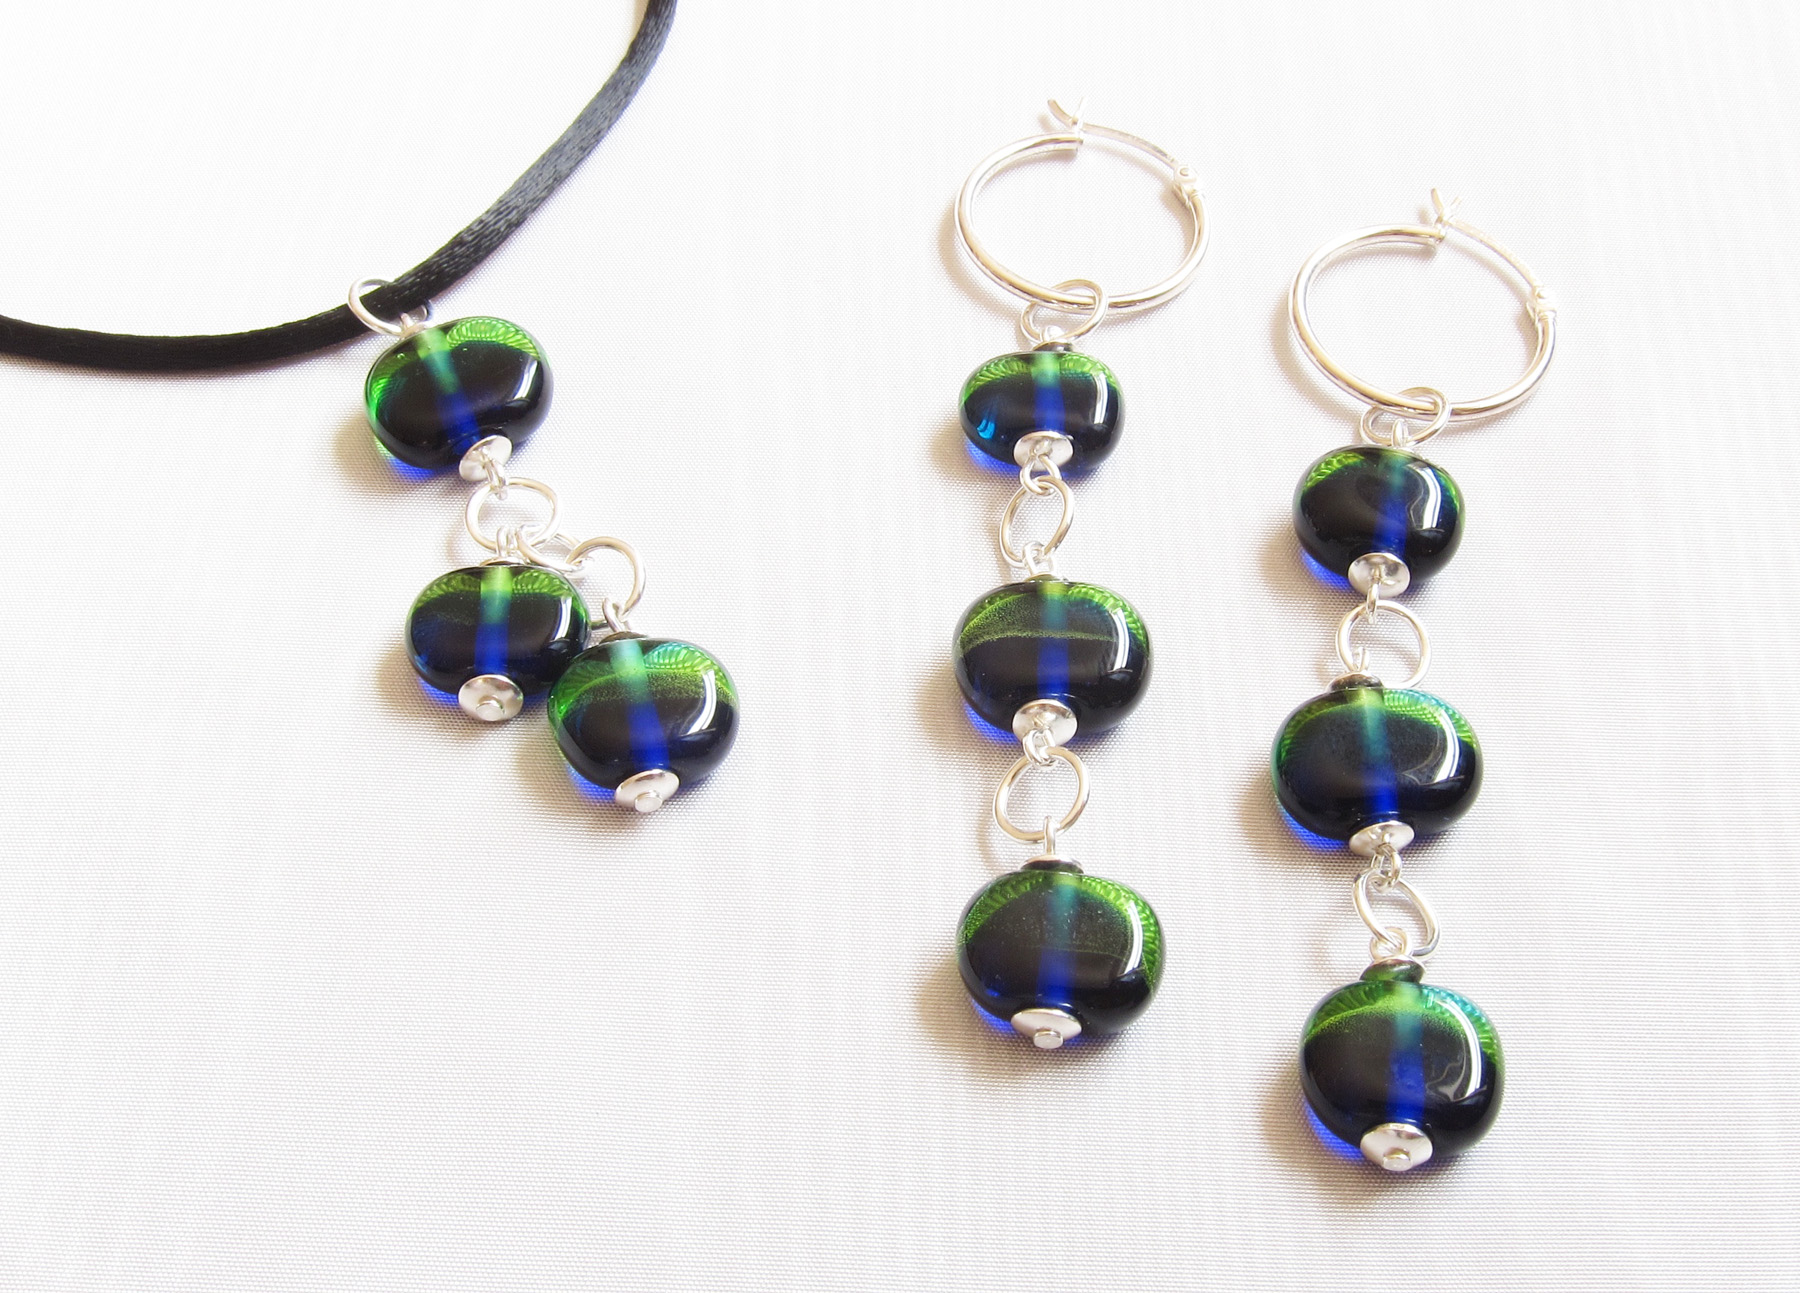 Peacock Disk Beads on Satin Cord Necklace and Matching Earrings